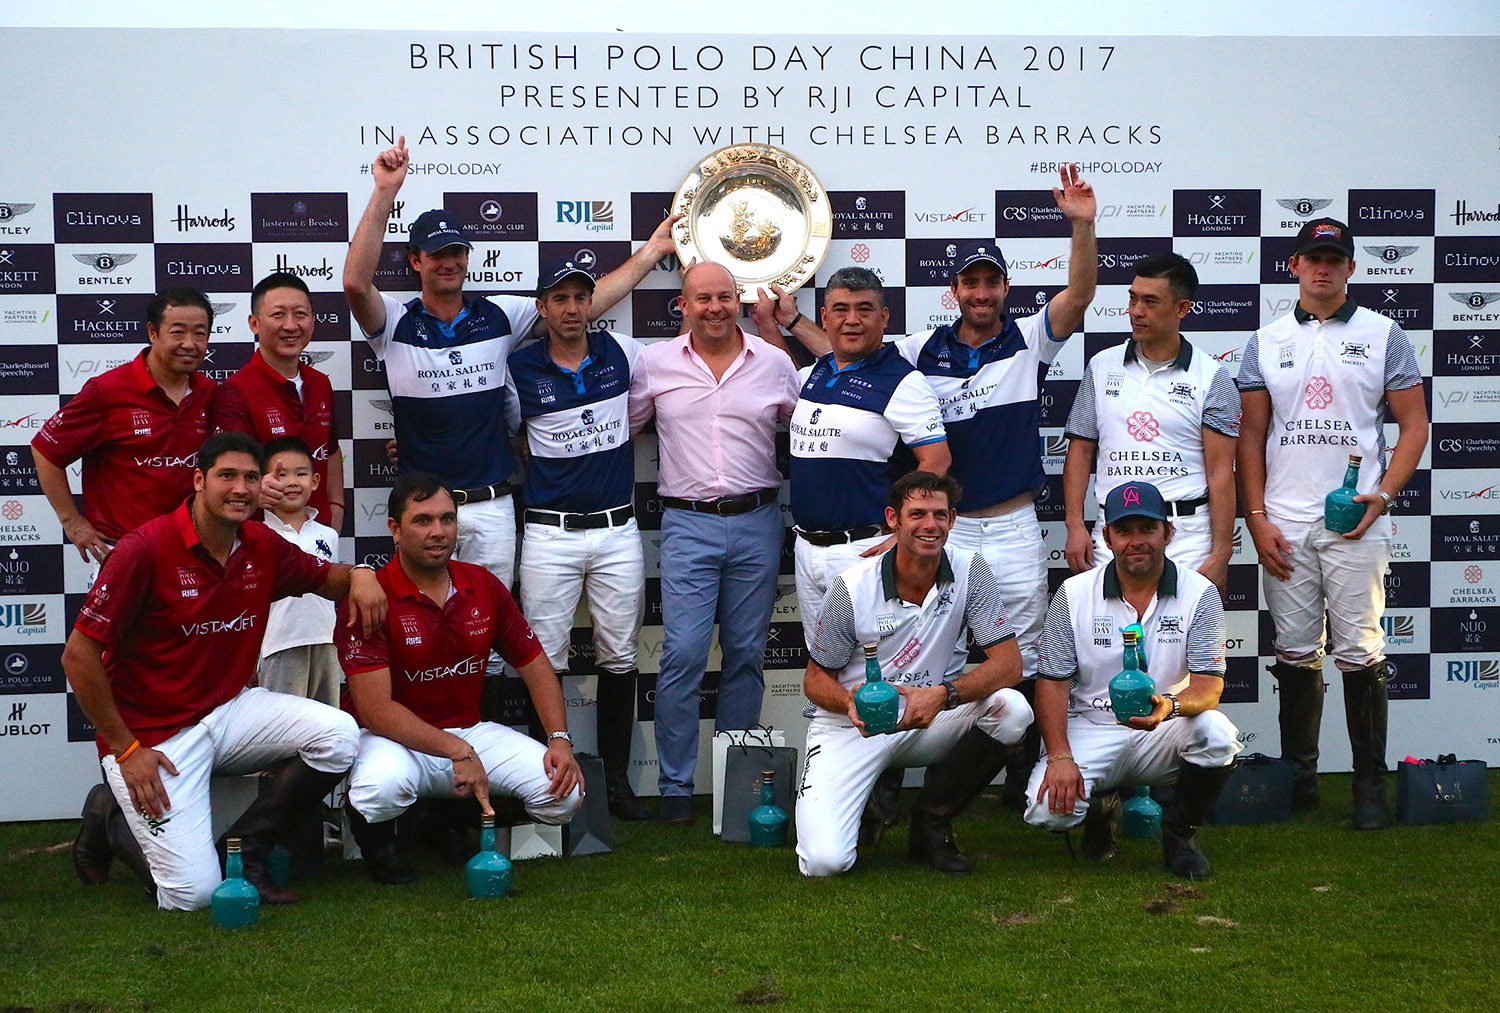 The 7th British Polo Day China